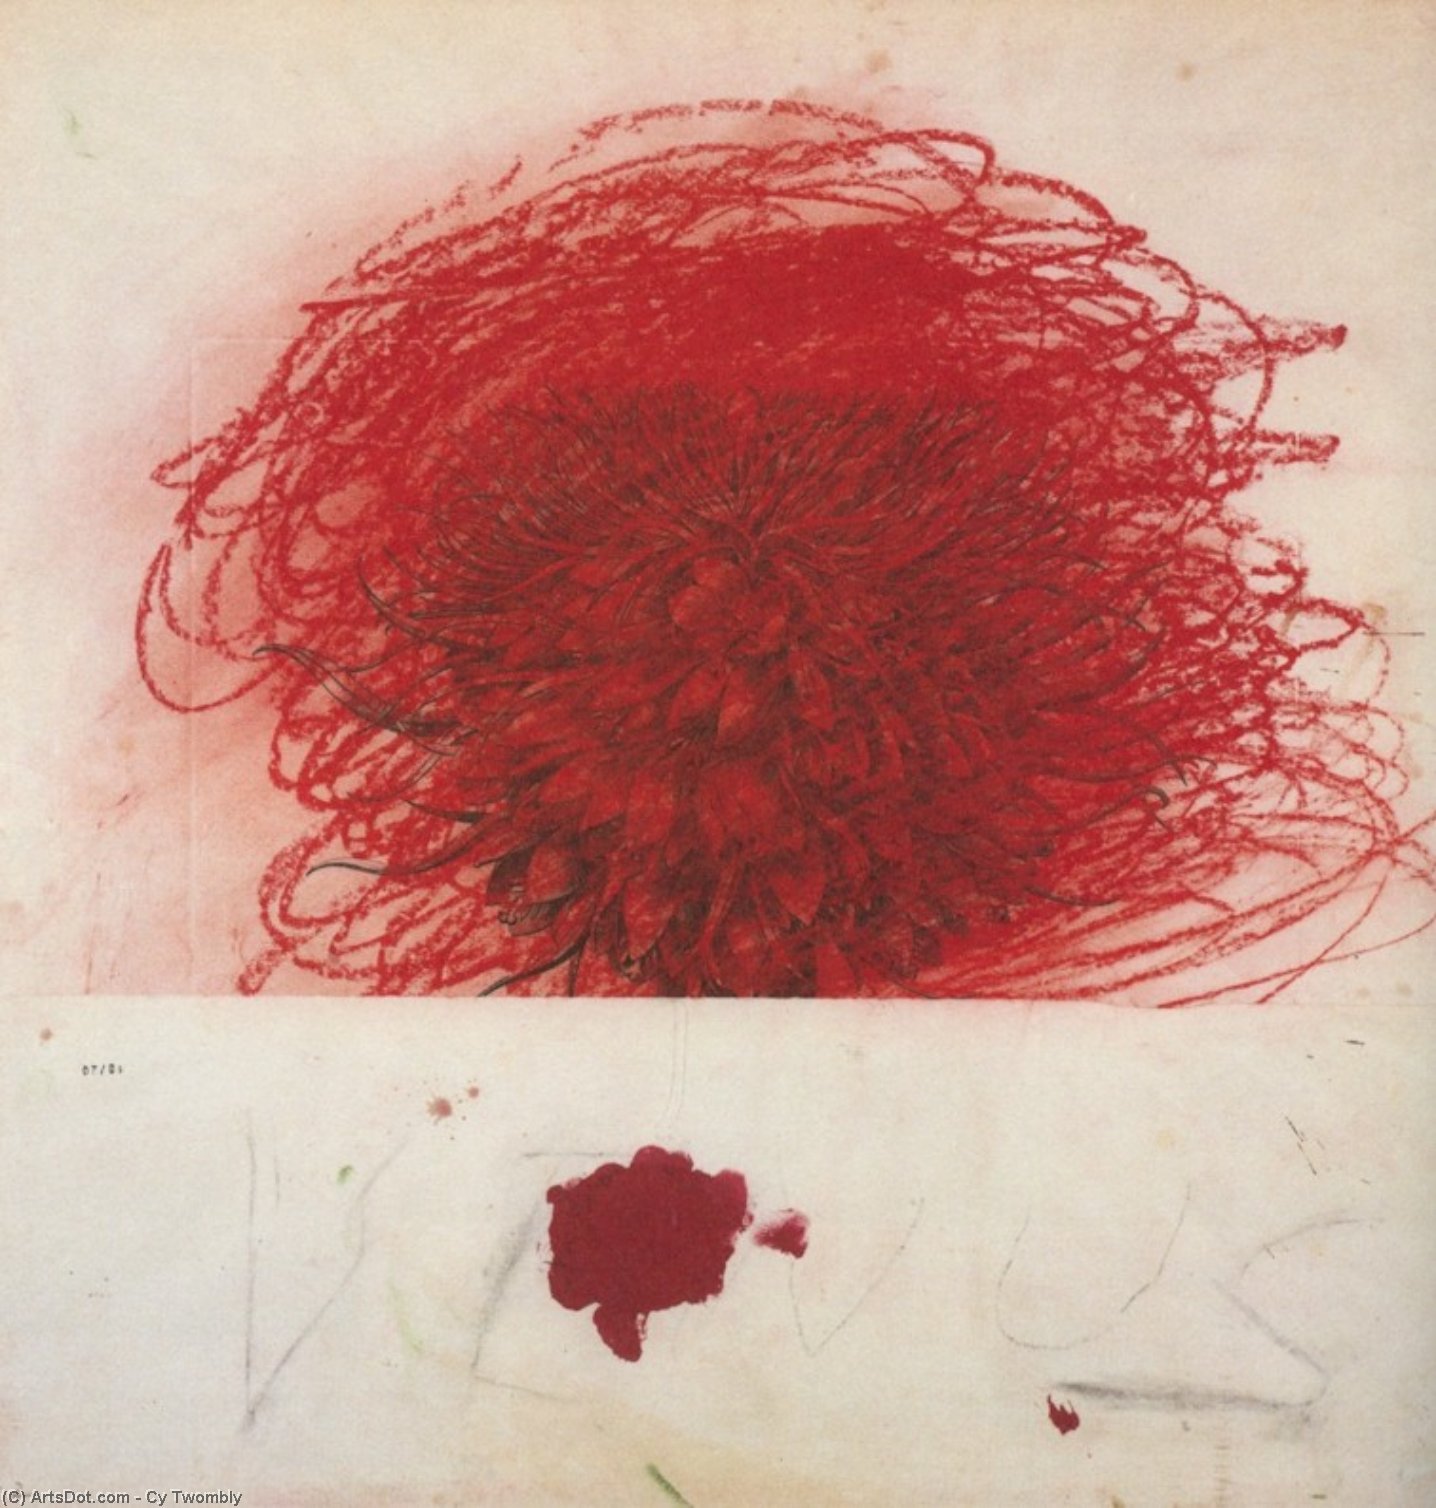 Pan II, 1980 by Cy Twombly (1928-2011, United States) Cy Twombly | ArtsDot.com